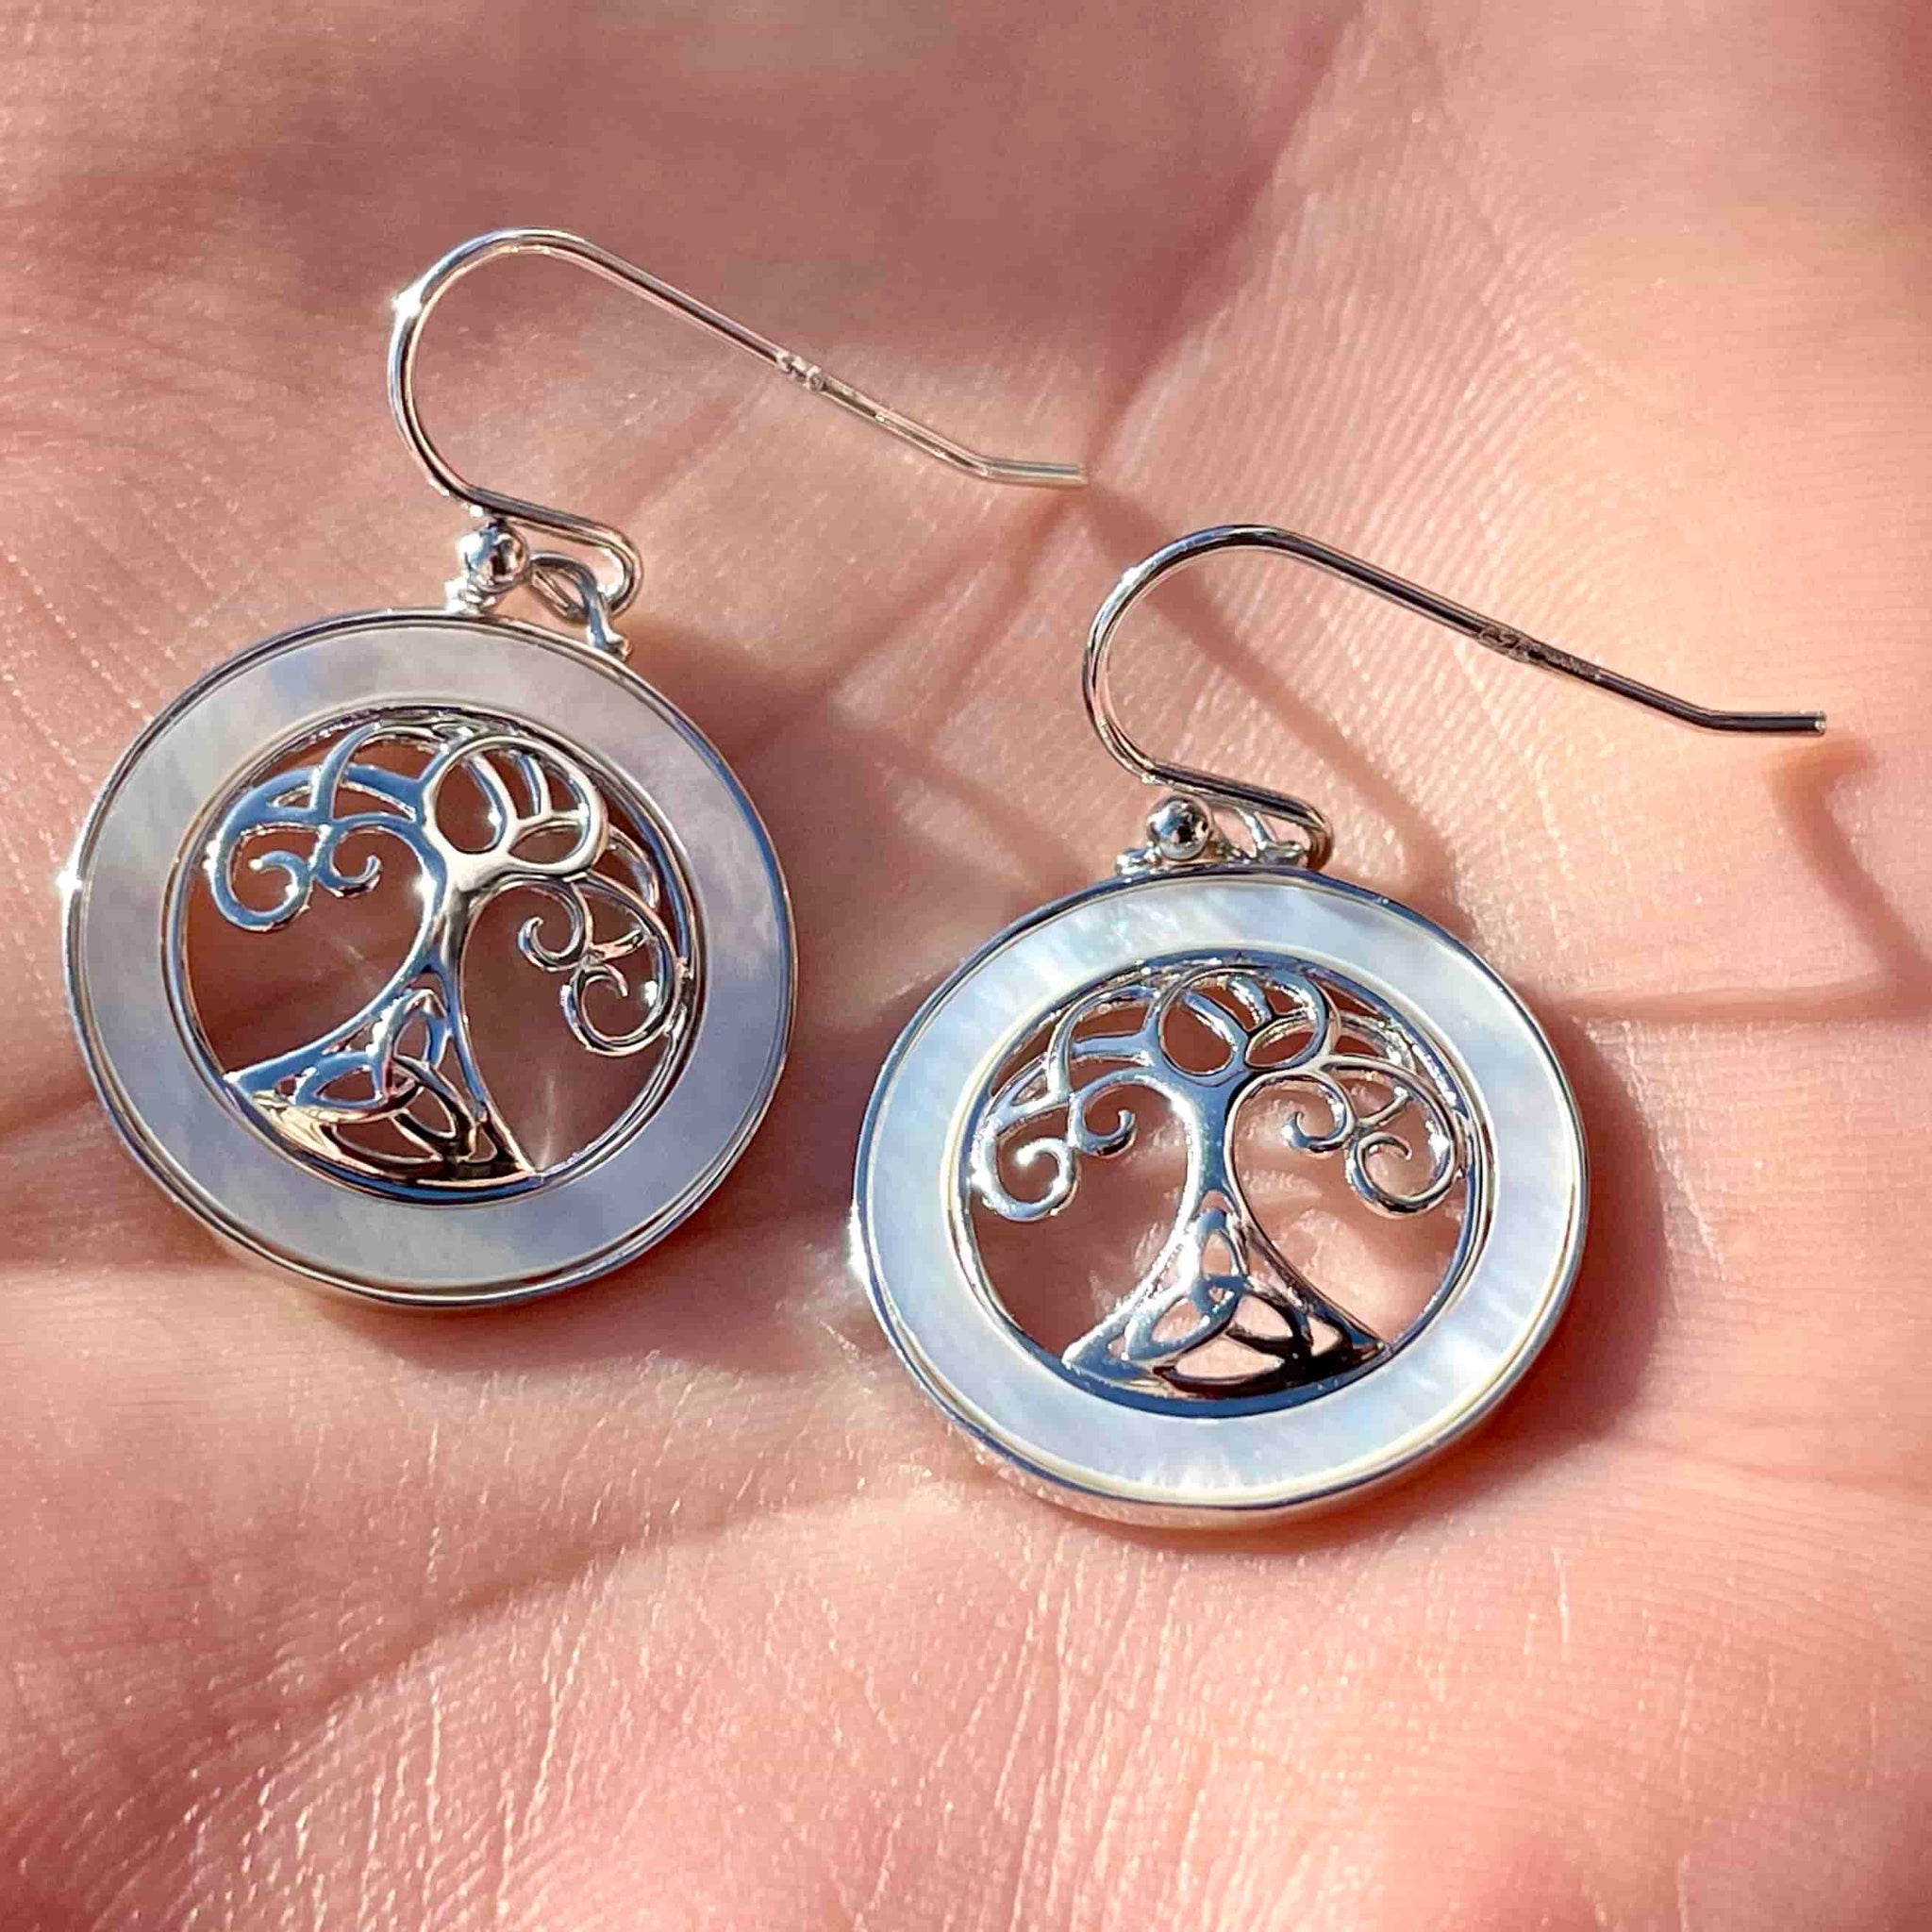 Silver Mother of Pearl Tree of Life Earrings